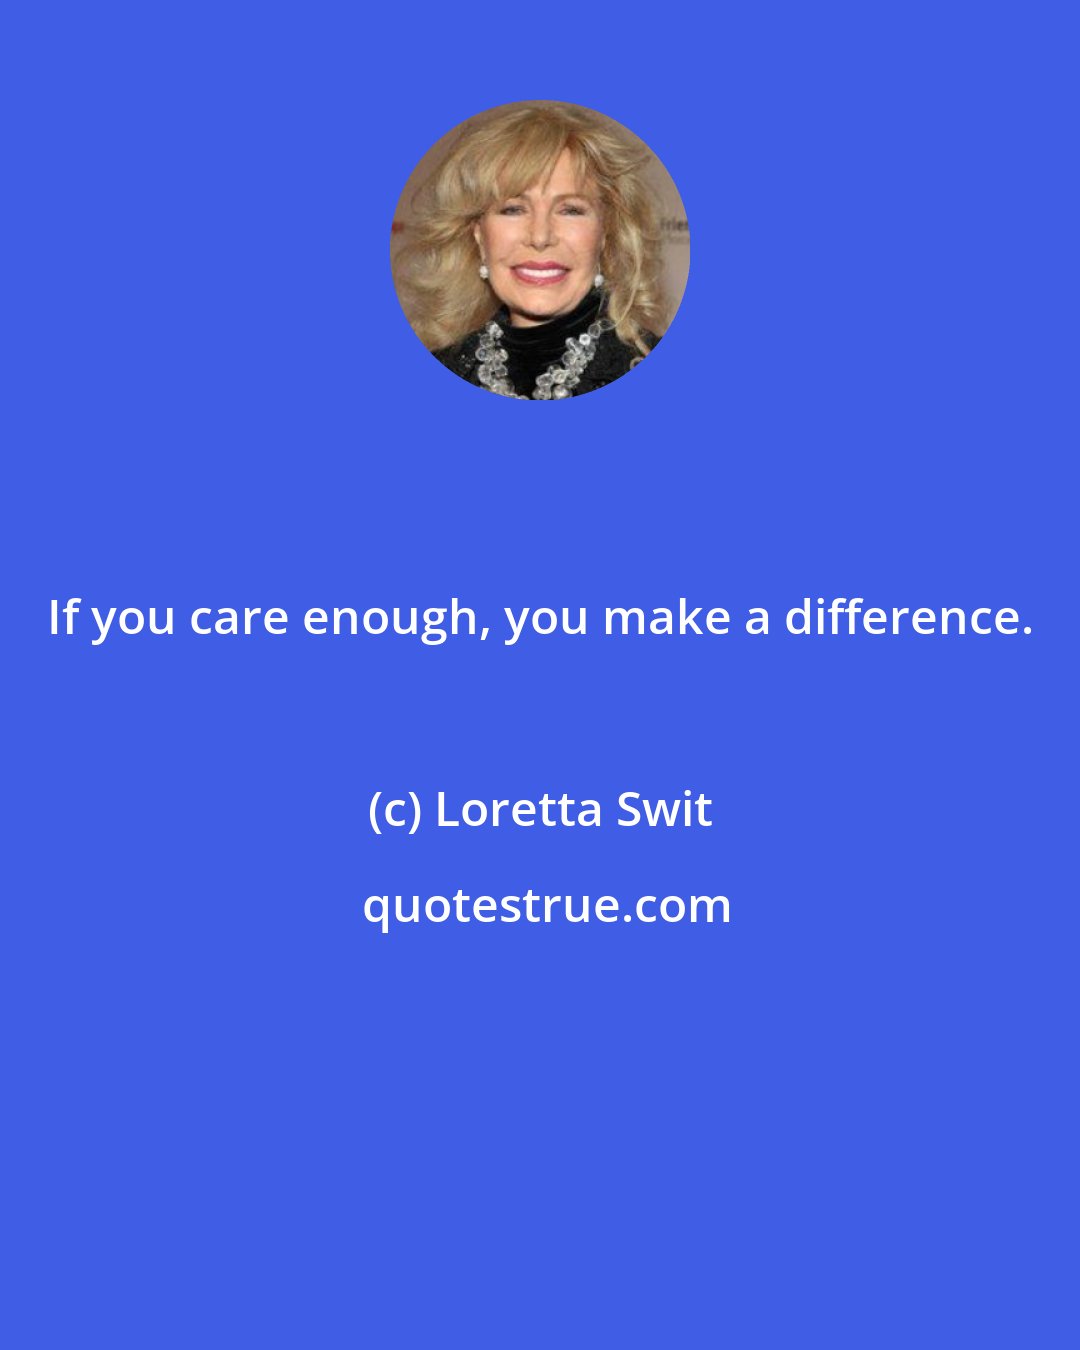 Loretta Swit: If you care enough, you make a difference.